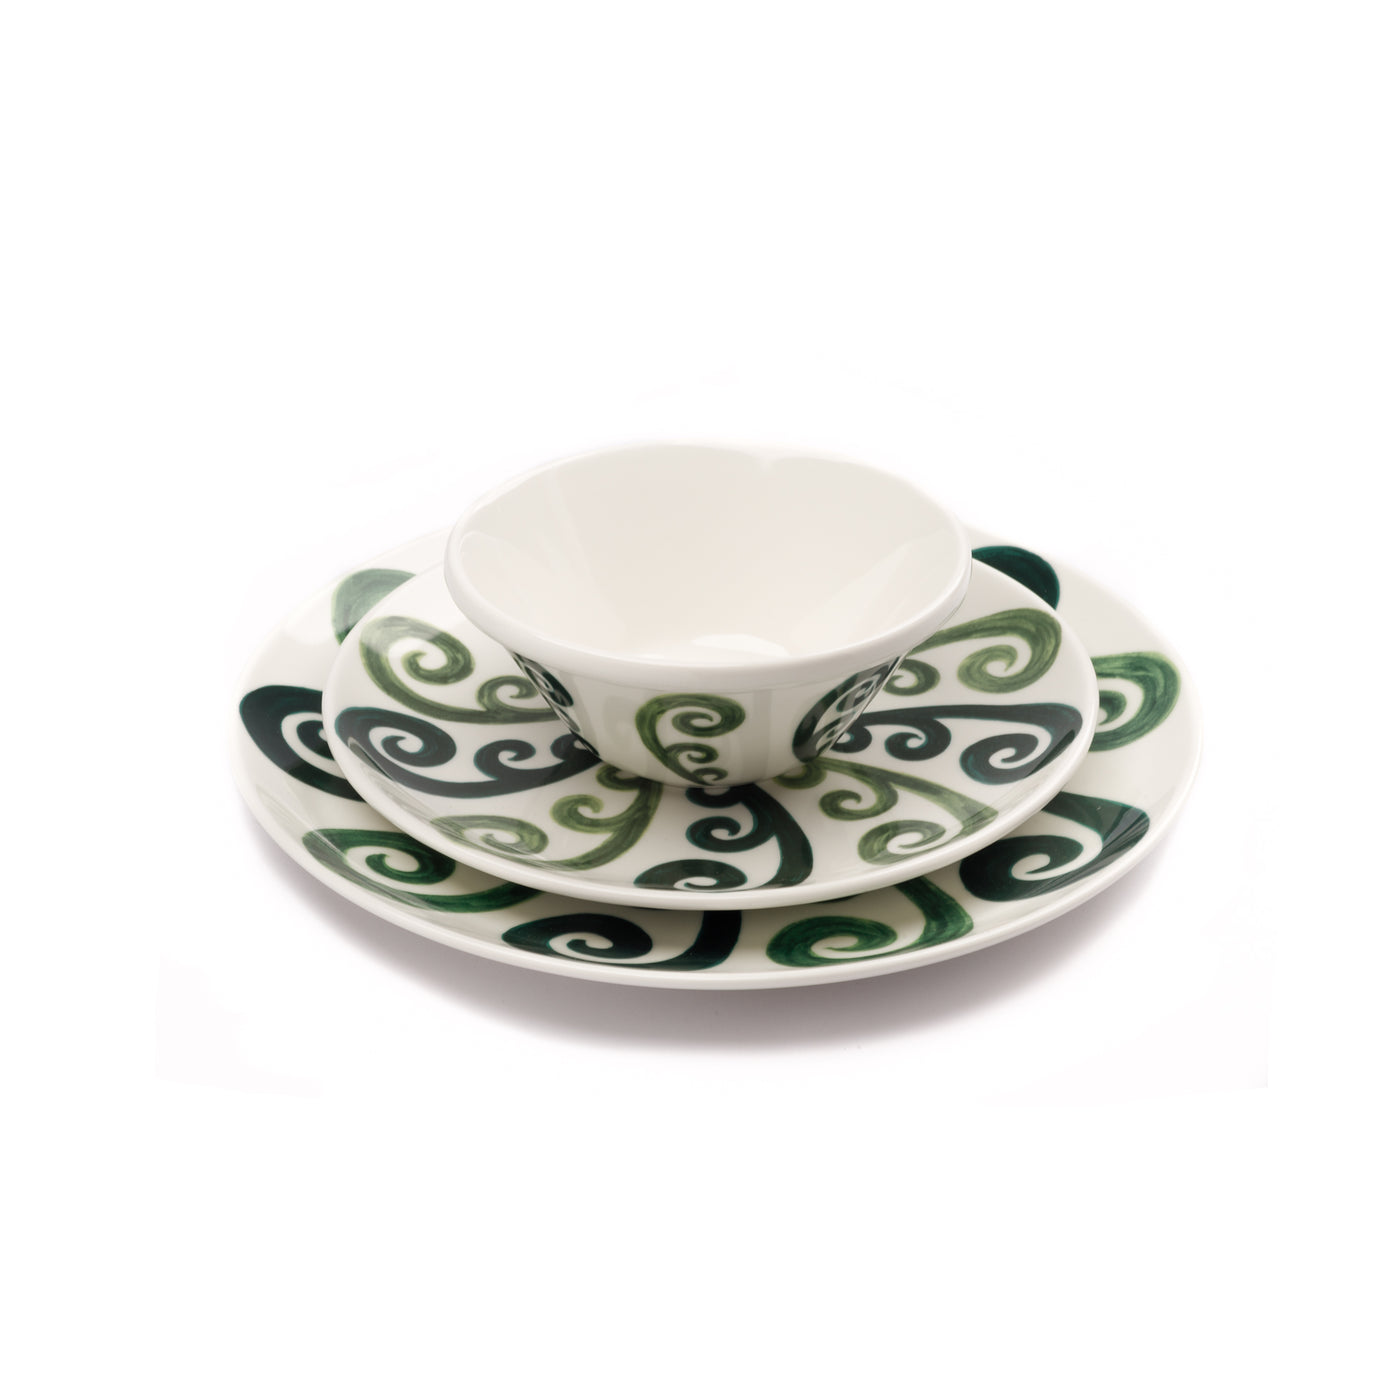 Peacock Cereal Bowl in Two Tone Green